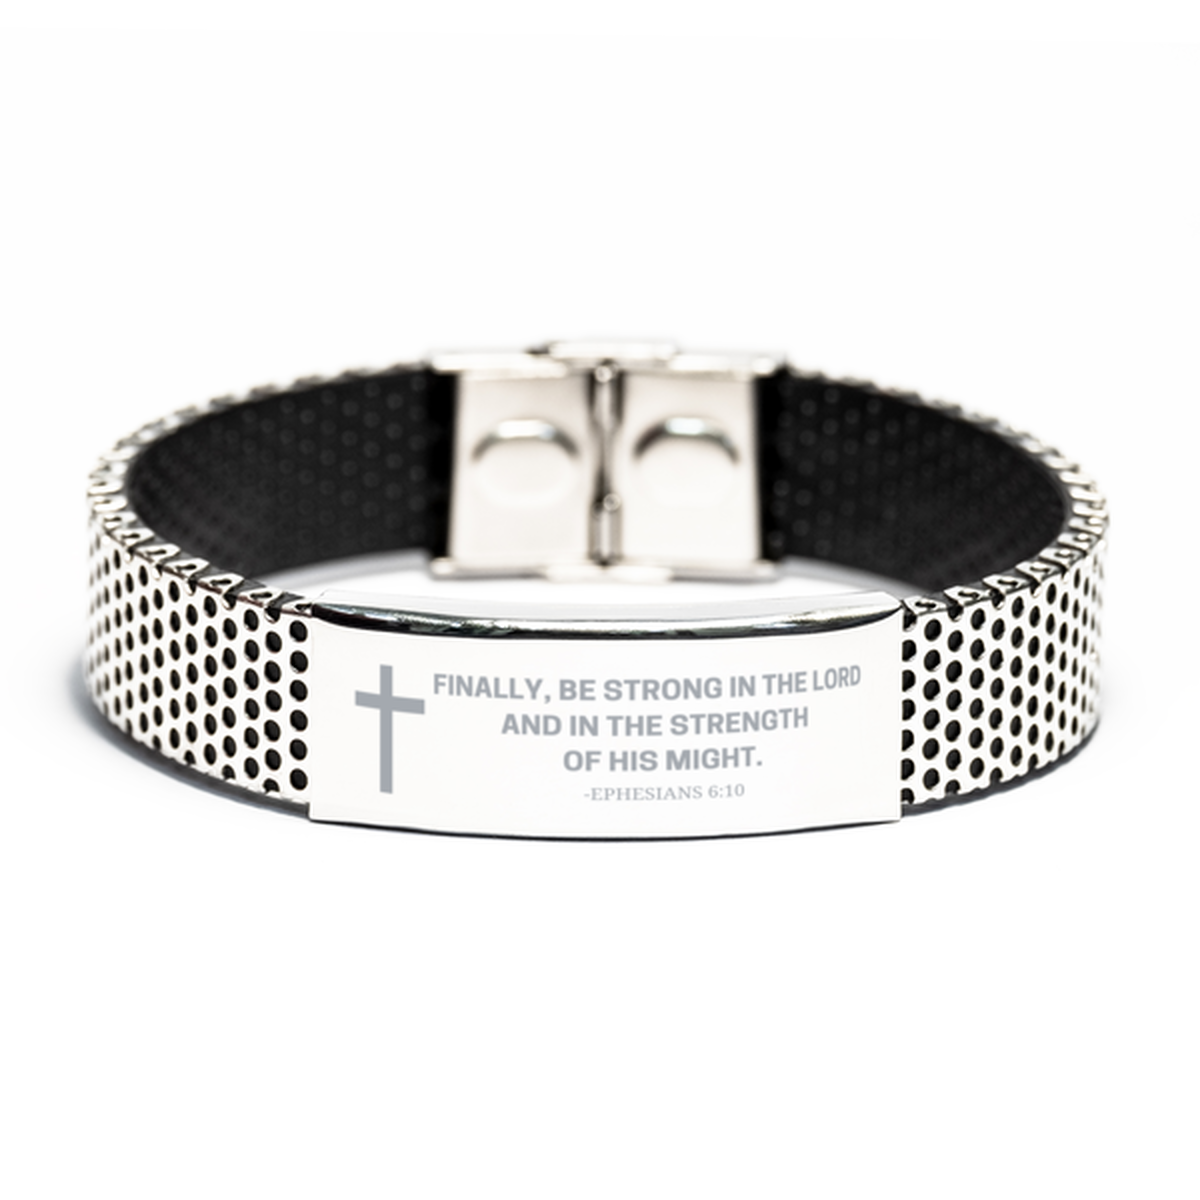 Baptism Gifts For Teenage Boys Girls, Christian Bible Verse Stainless Steel Bracelet, Finally, be strong in the Lord Catholic Confirmation Gifts for Son, Godson, Grandson, Nephew